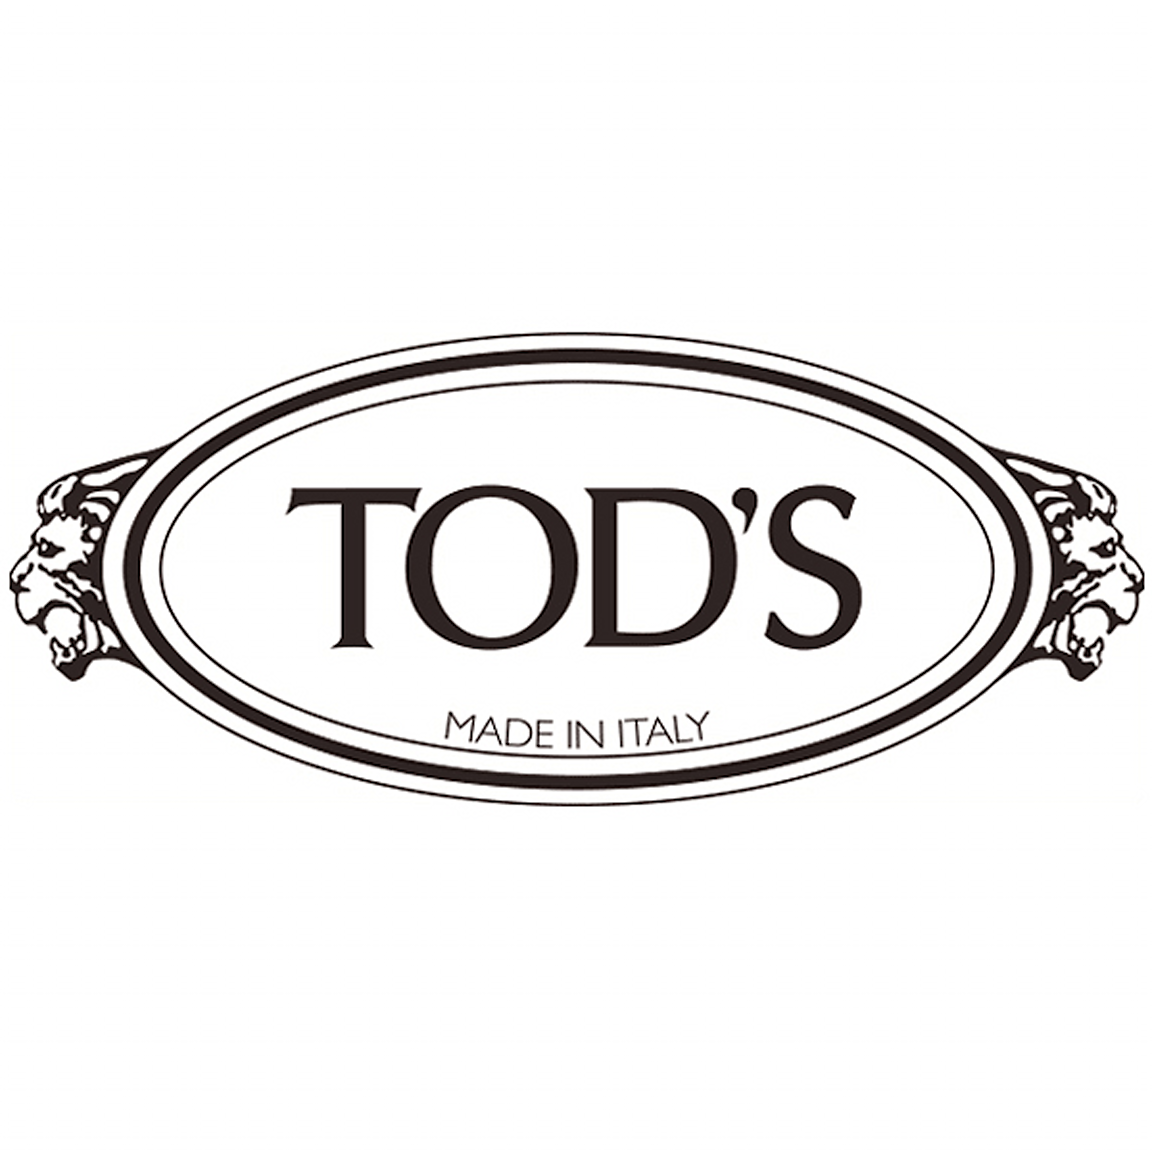 tods-logo